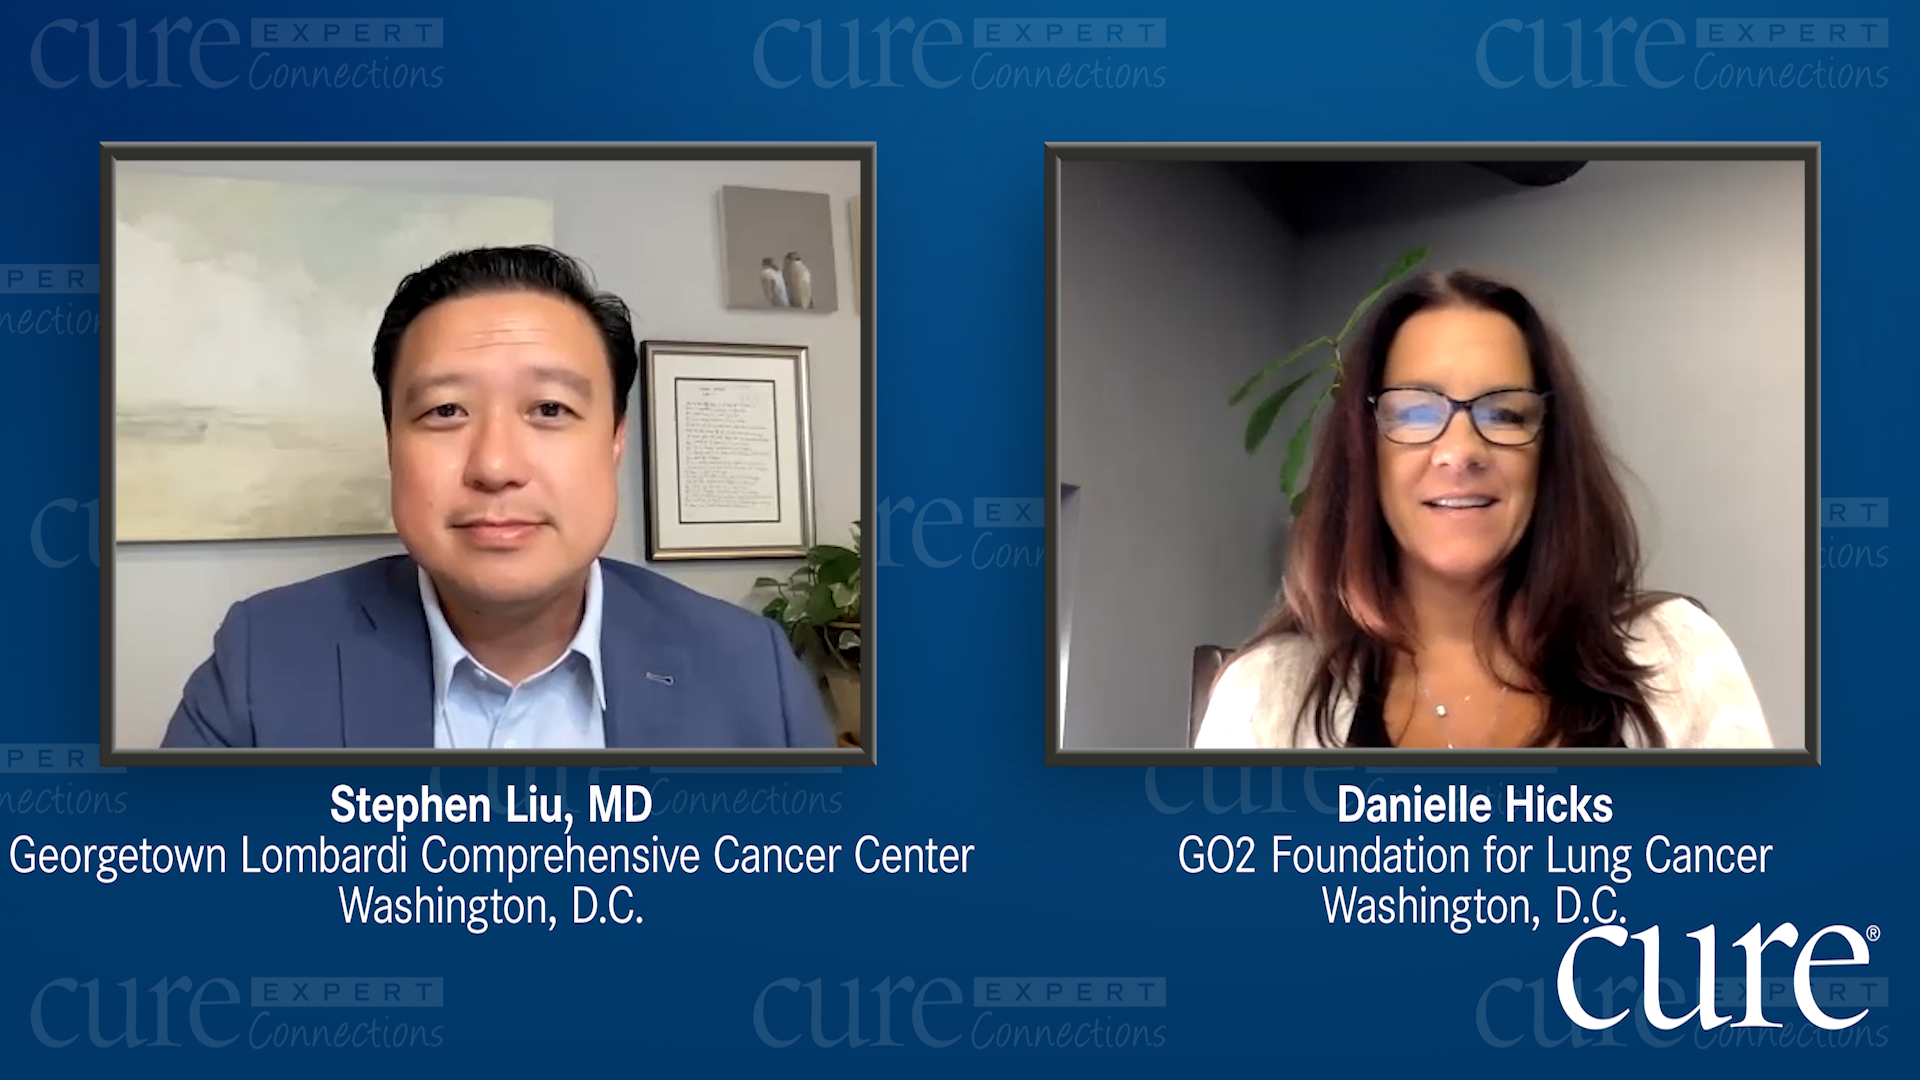 Expert Advice for Navigating Non-Small Cell Lung Cancer Care and Treatment  - Patient Empowerment Network